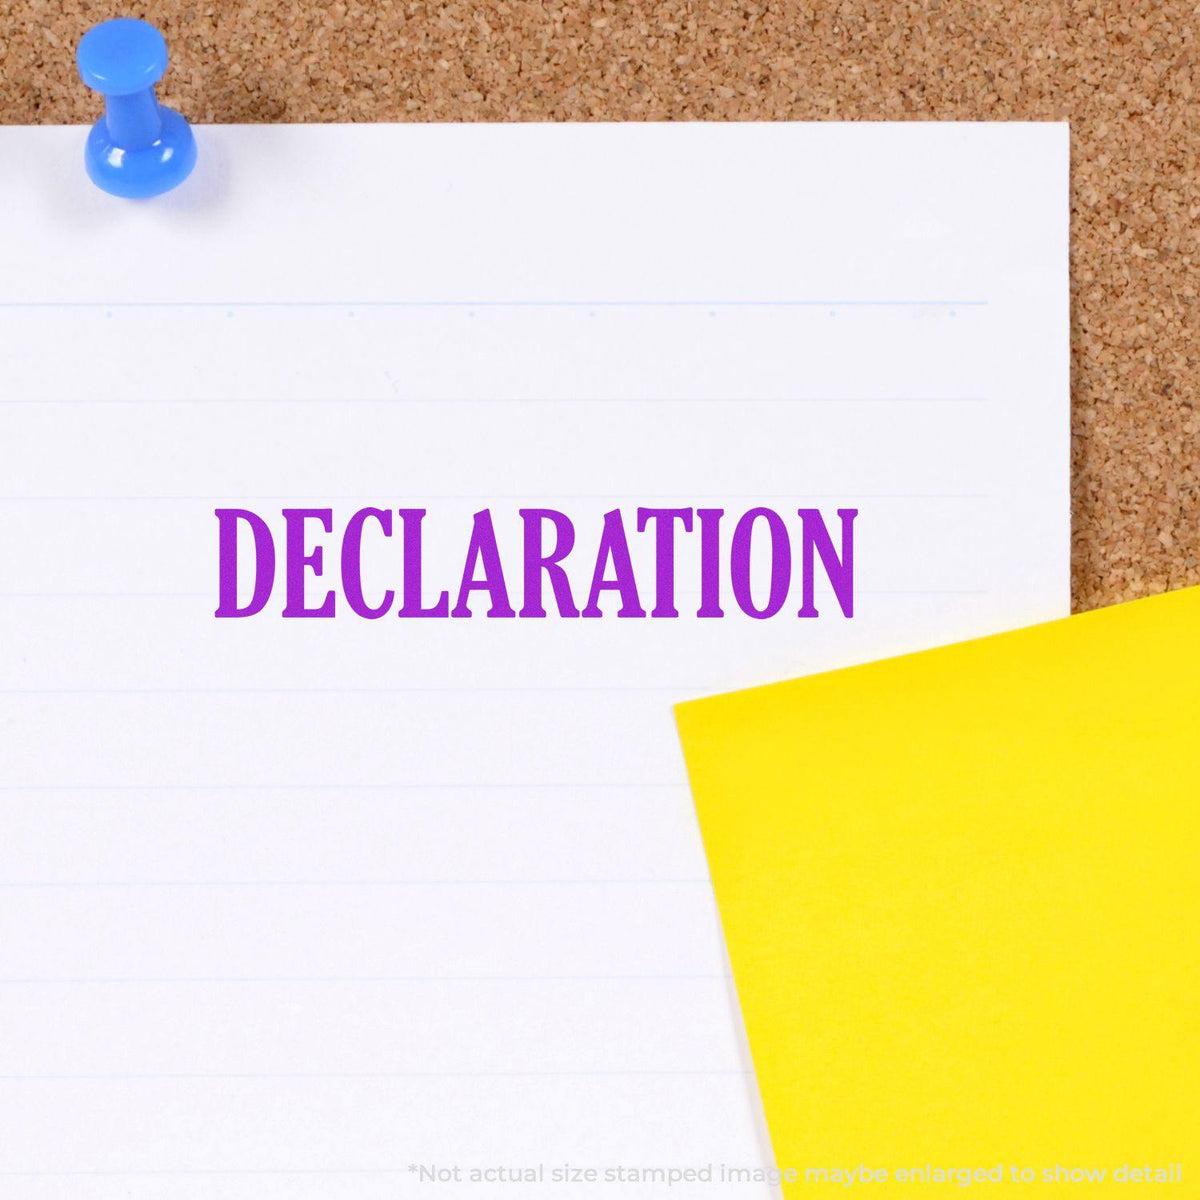 Large Declaration Rubber Stamp In Use Photo